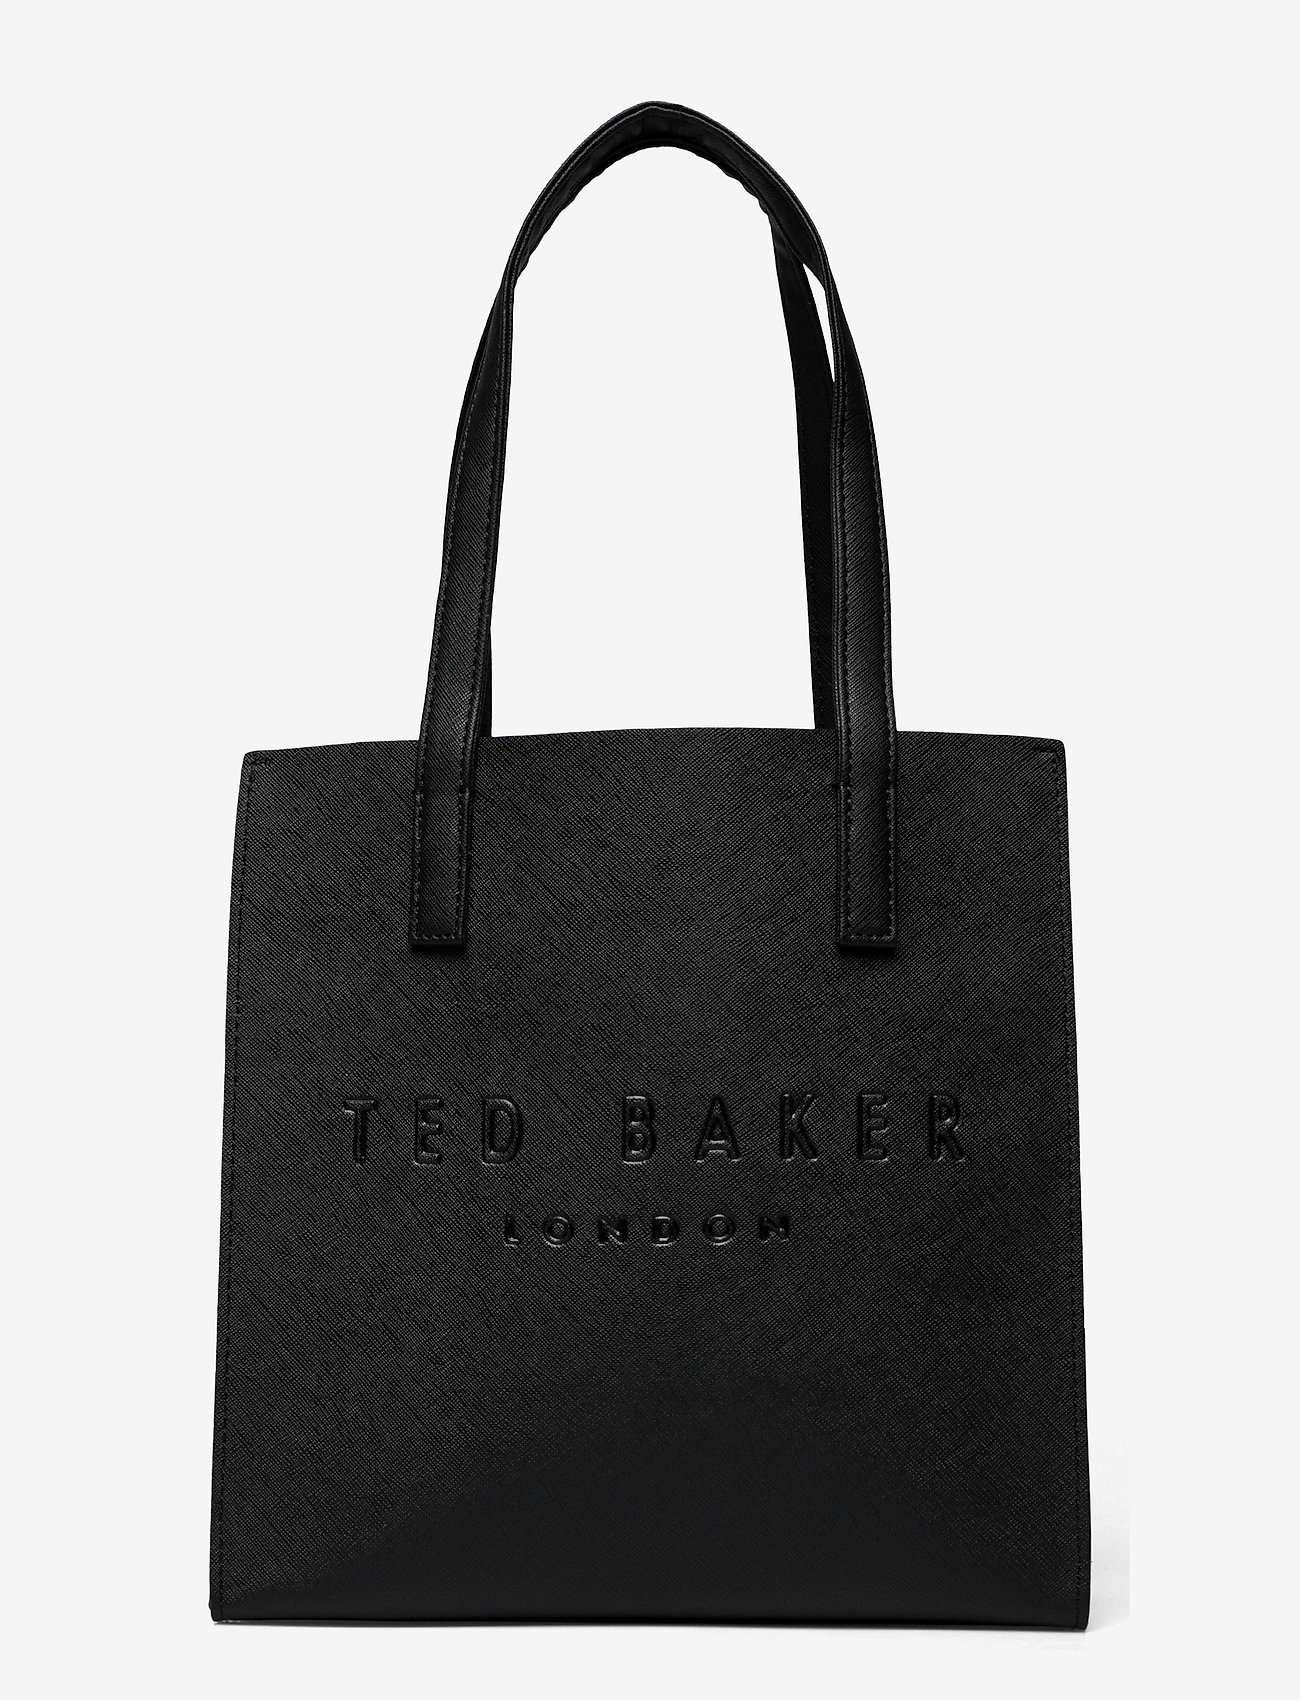 Ted Baker - SEACON - shoppers - black - 1